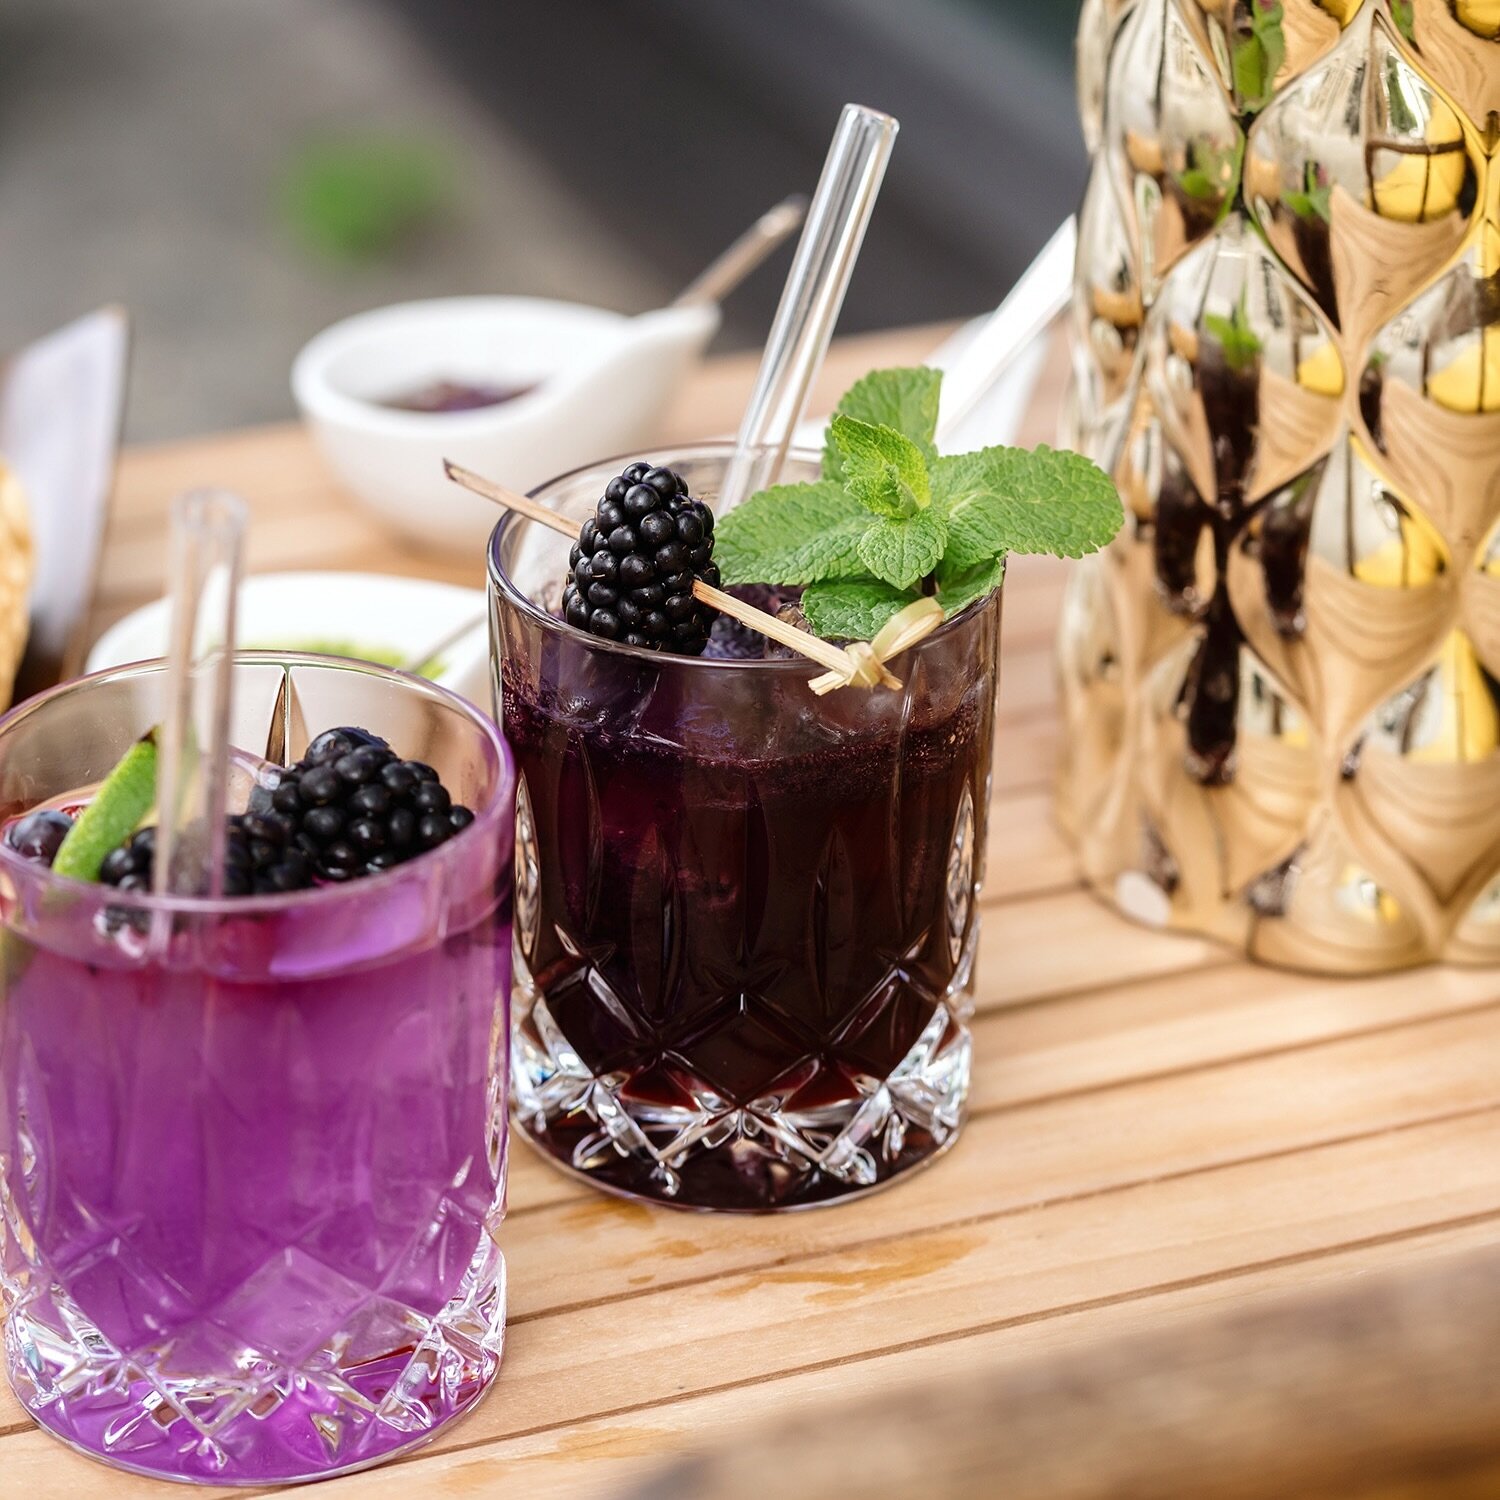 Every sip tells a story&hellip; have you indulged in our handcrafted alcoholic and non-alcoholic cocktails? 
#indiaclubberlin